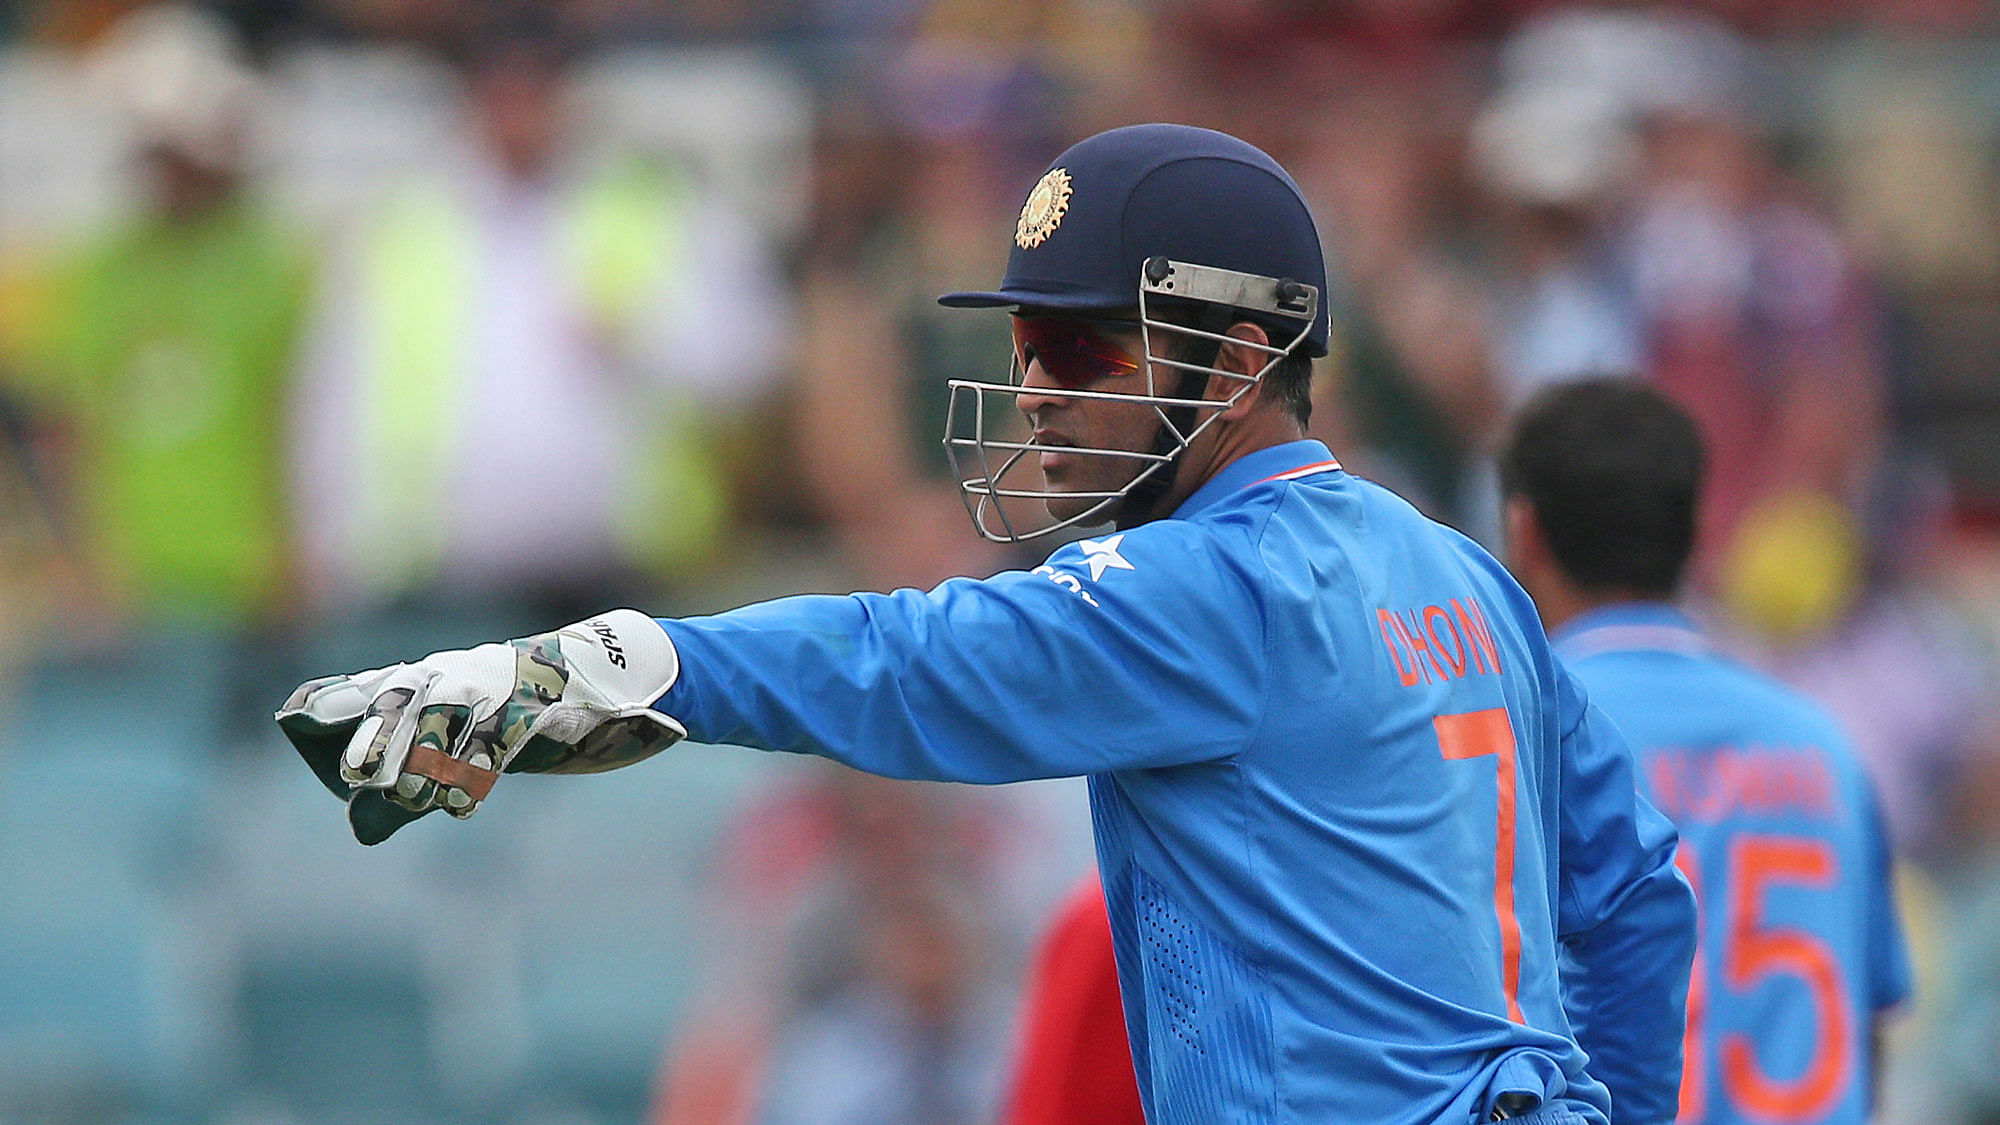 India lost the Canberra ODI by 25 runs to trail the series 4-0. (Photo: AP)